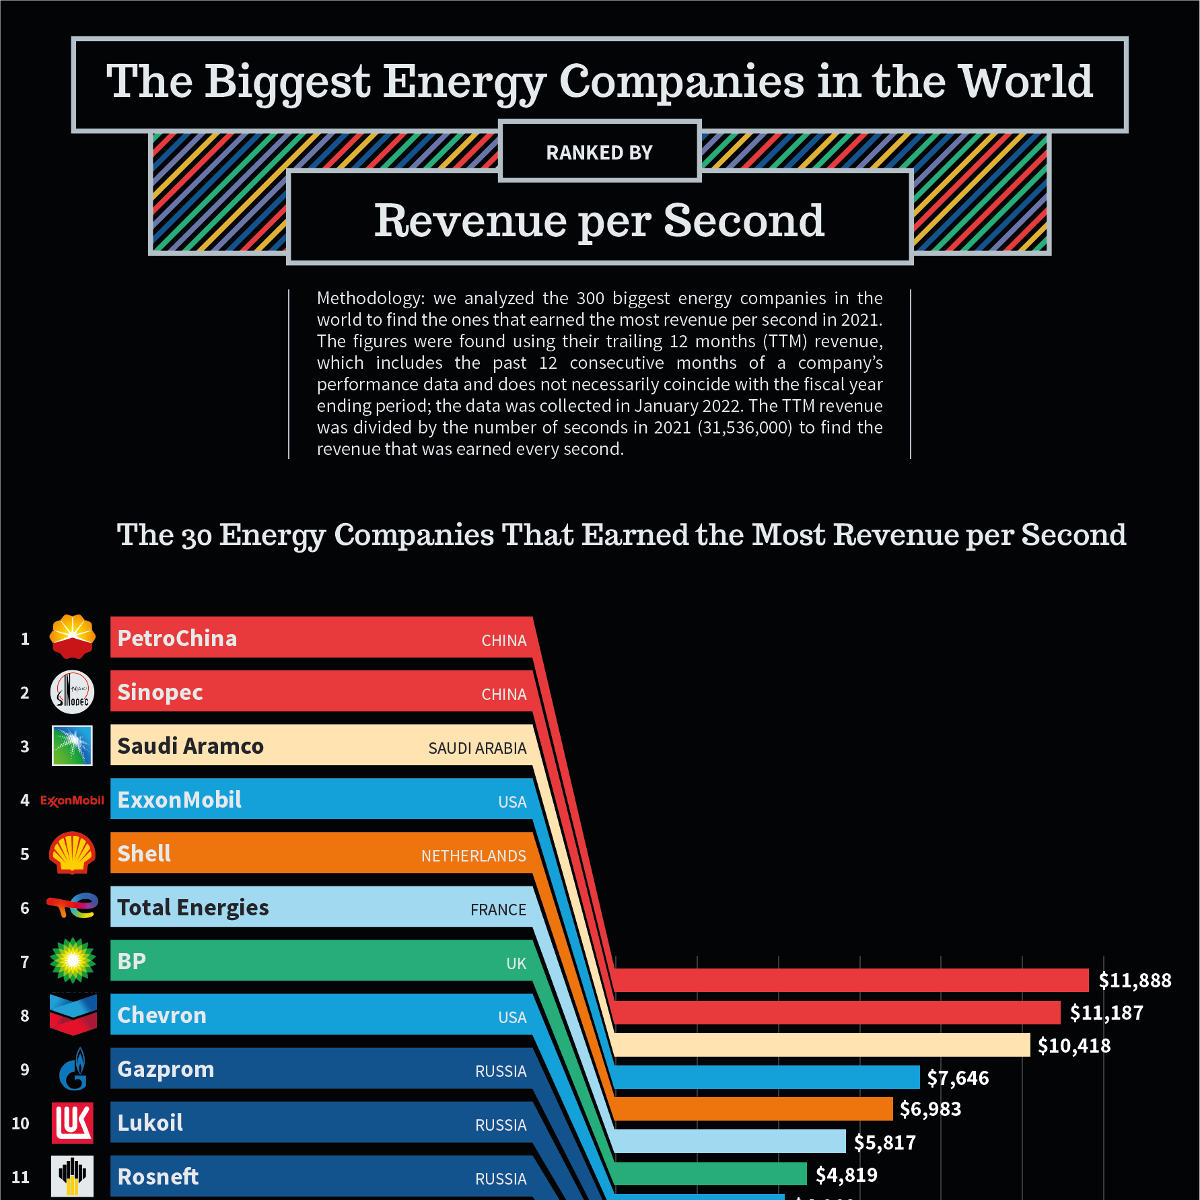 The Biggest Energy Companies in the World Ranked by Revenue per Second